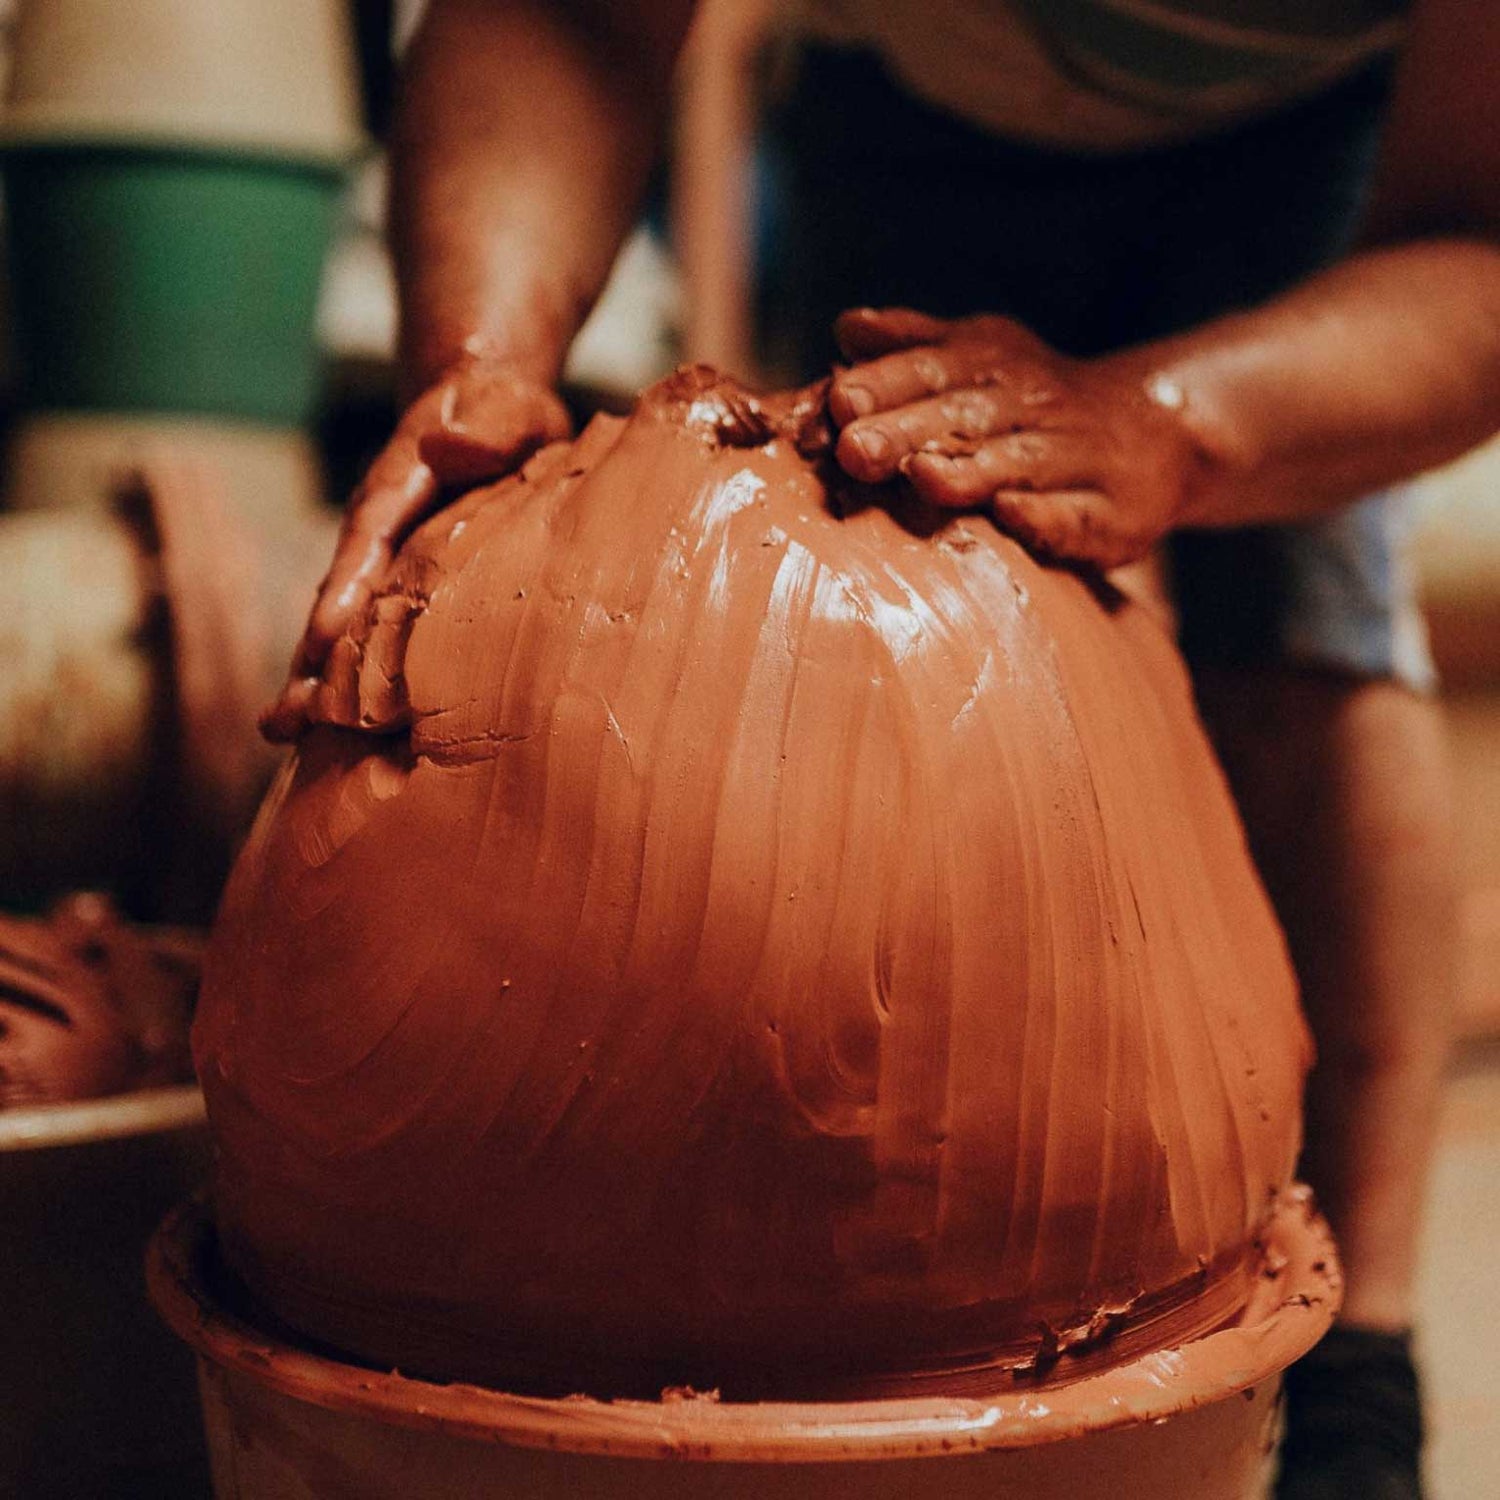 Shaping the clay into large spheres